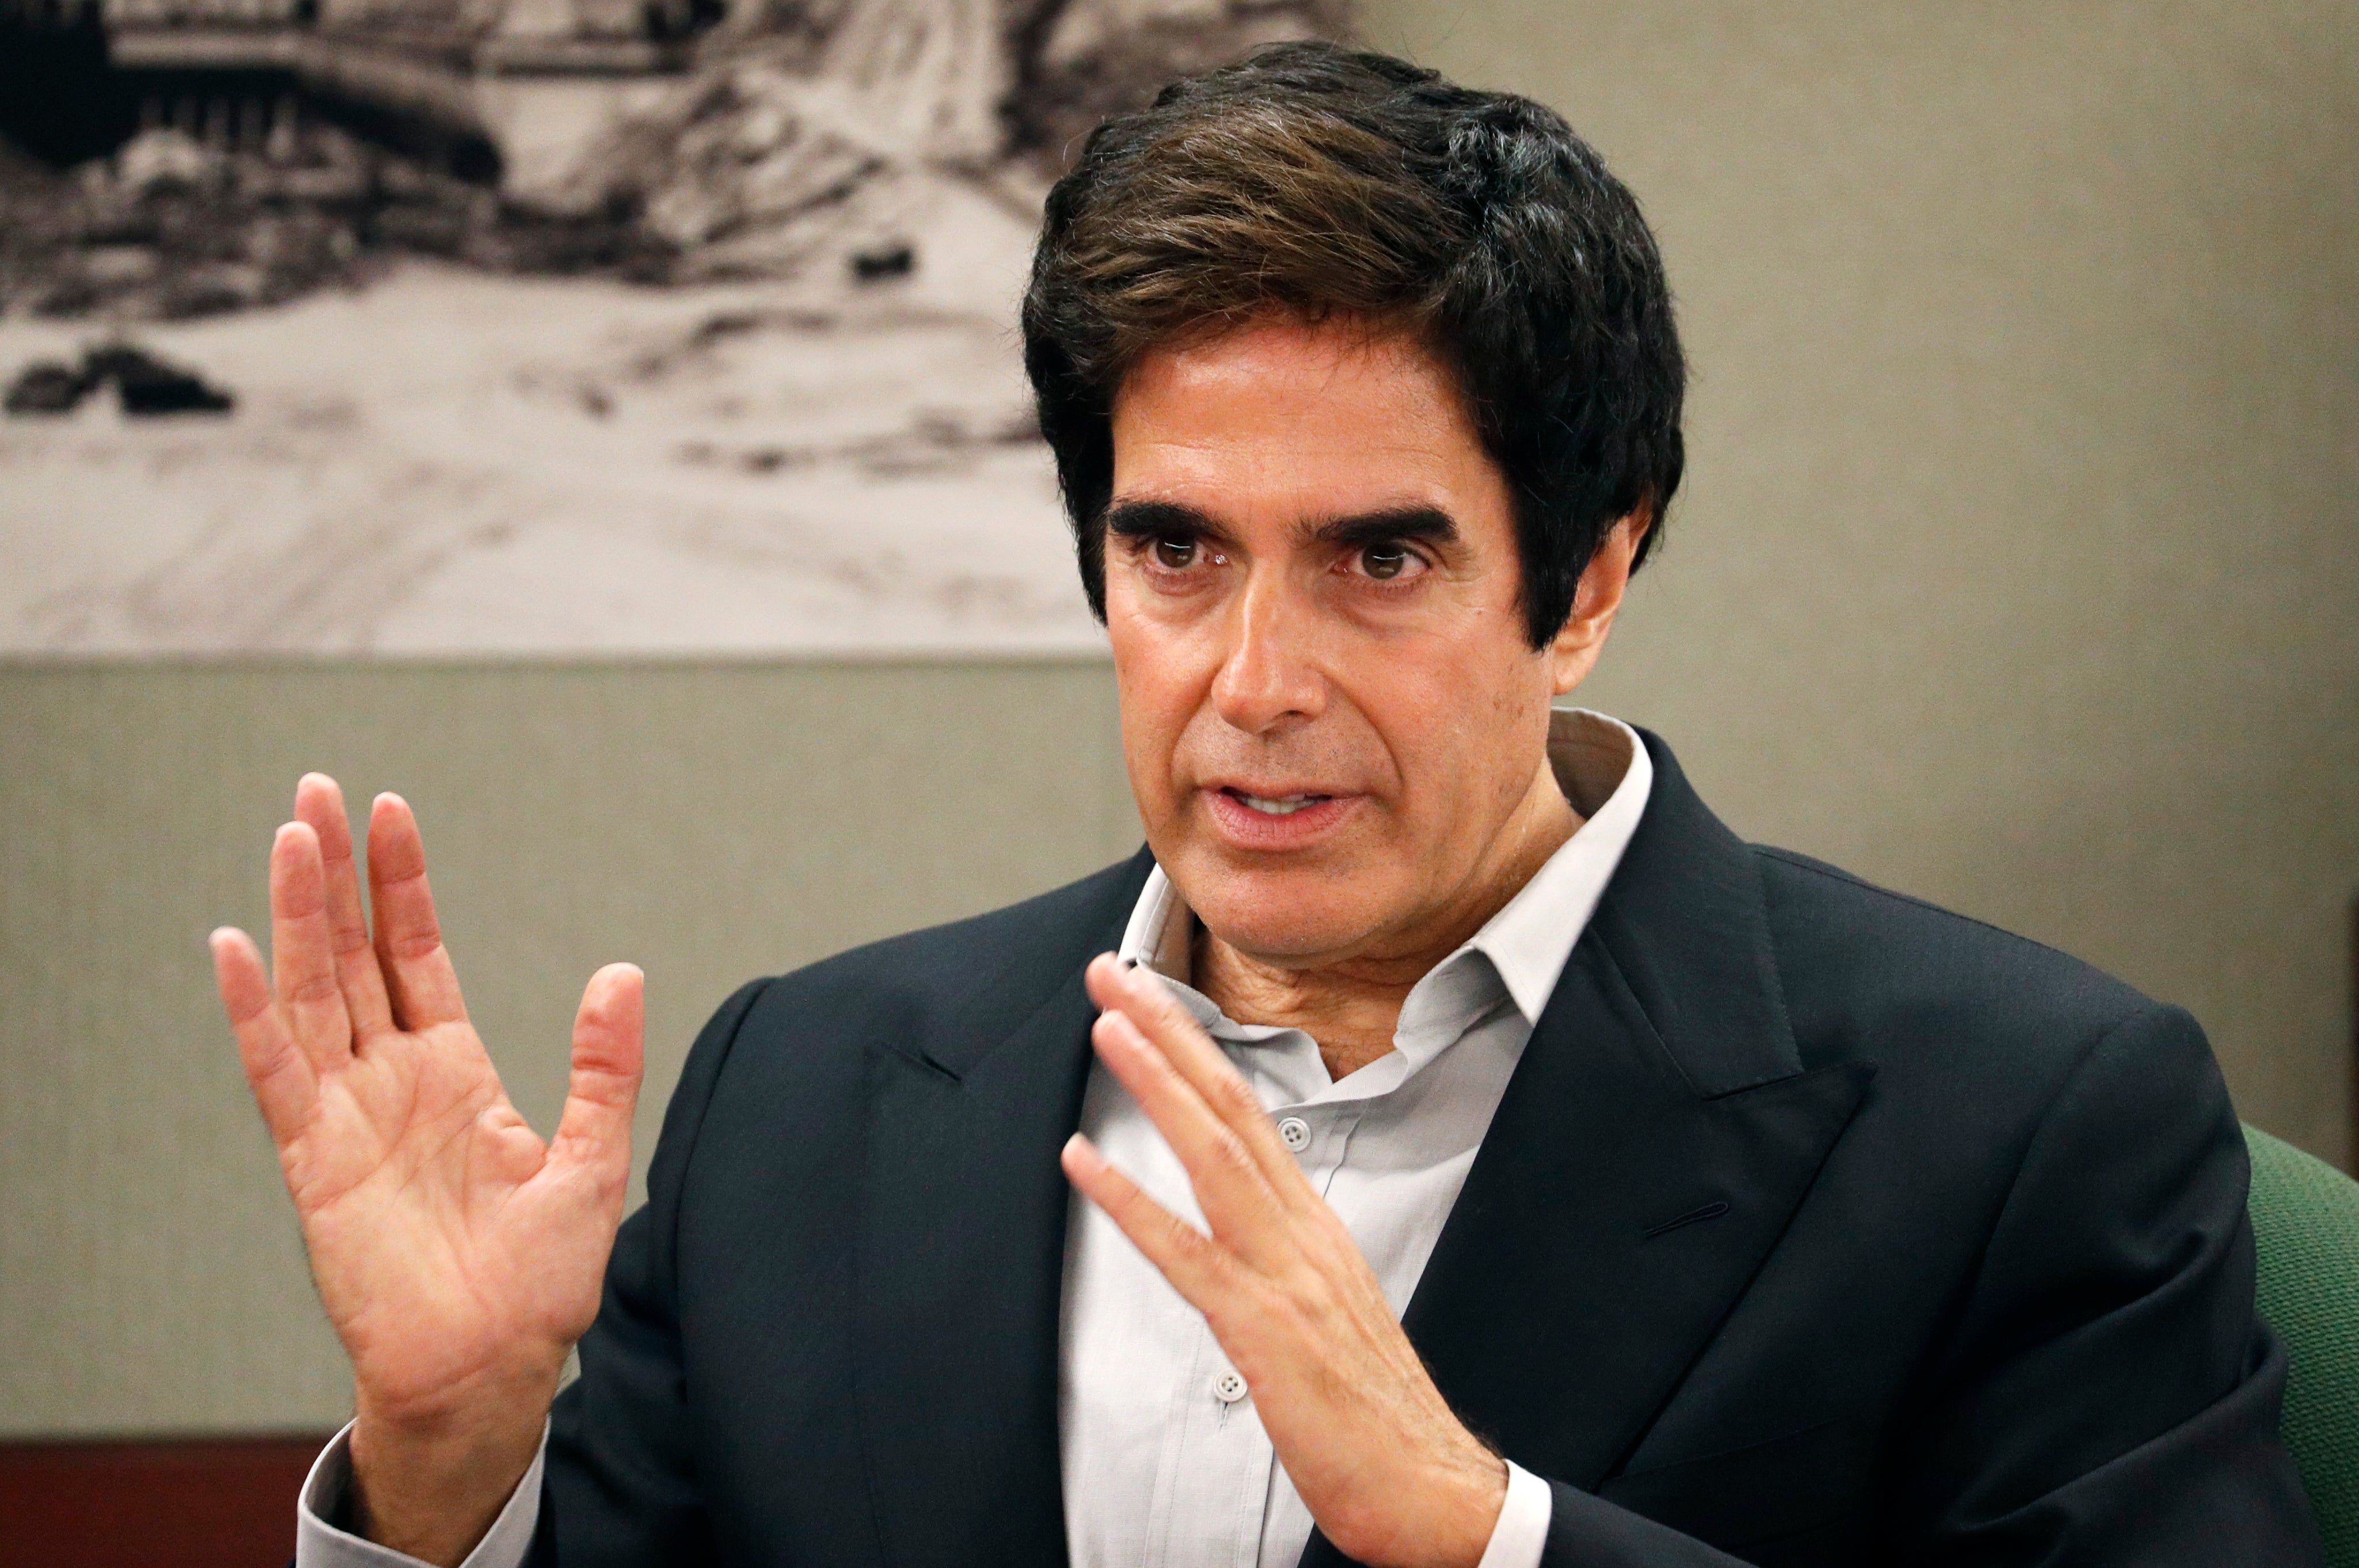 llusionist David Copperfield appears in court in Las Vegas on April 24, 2018